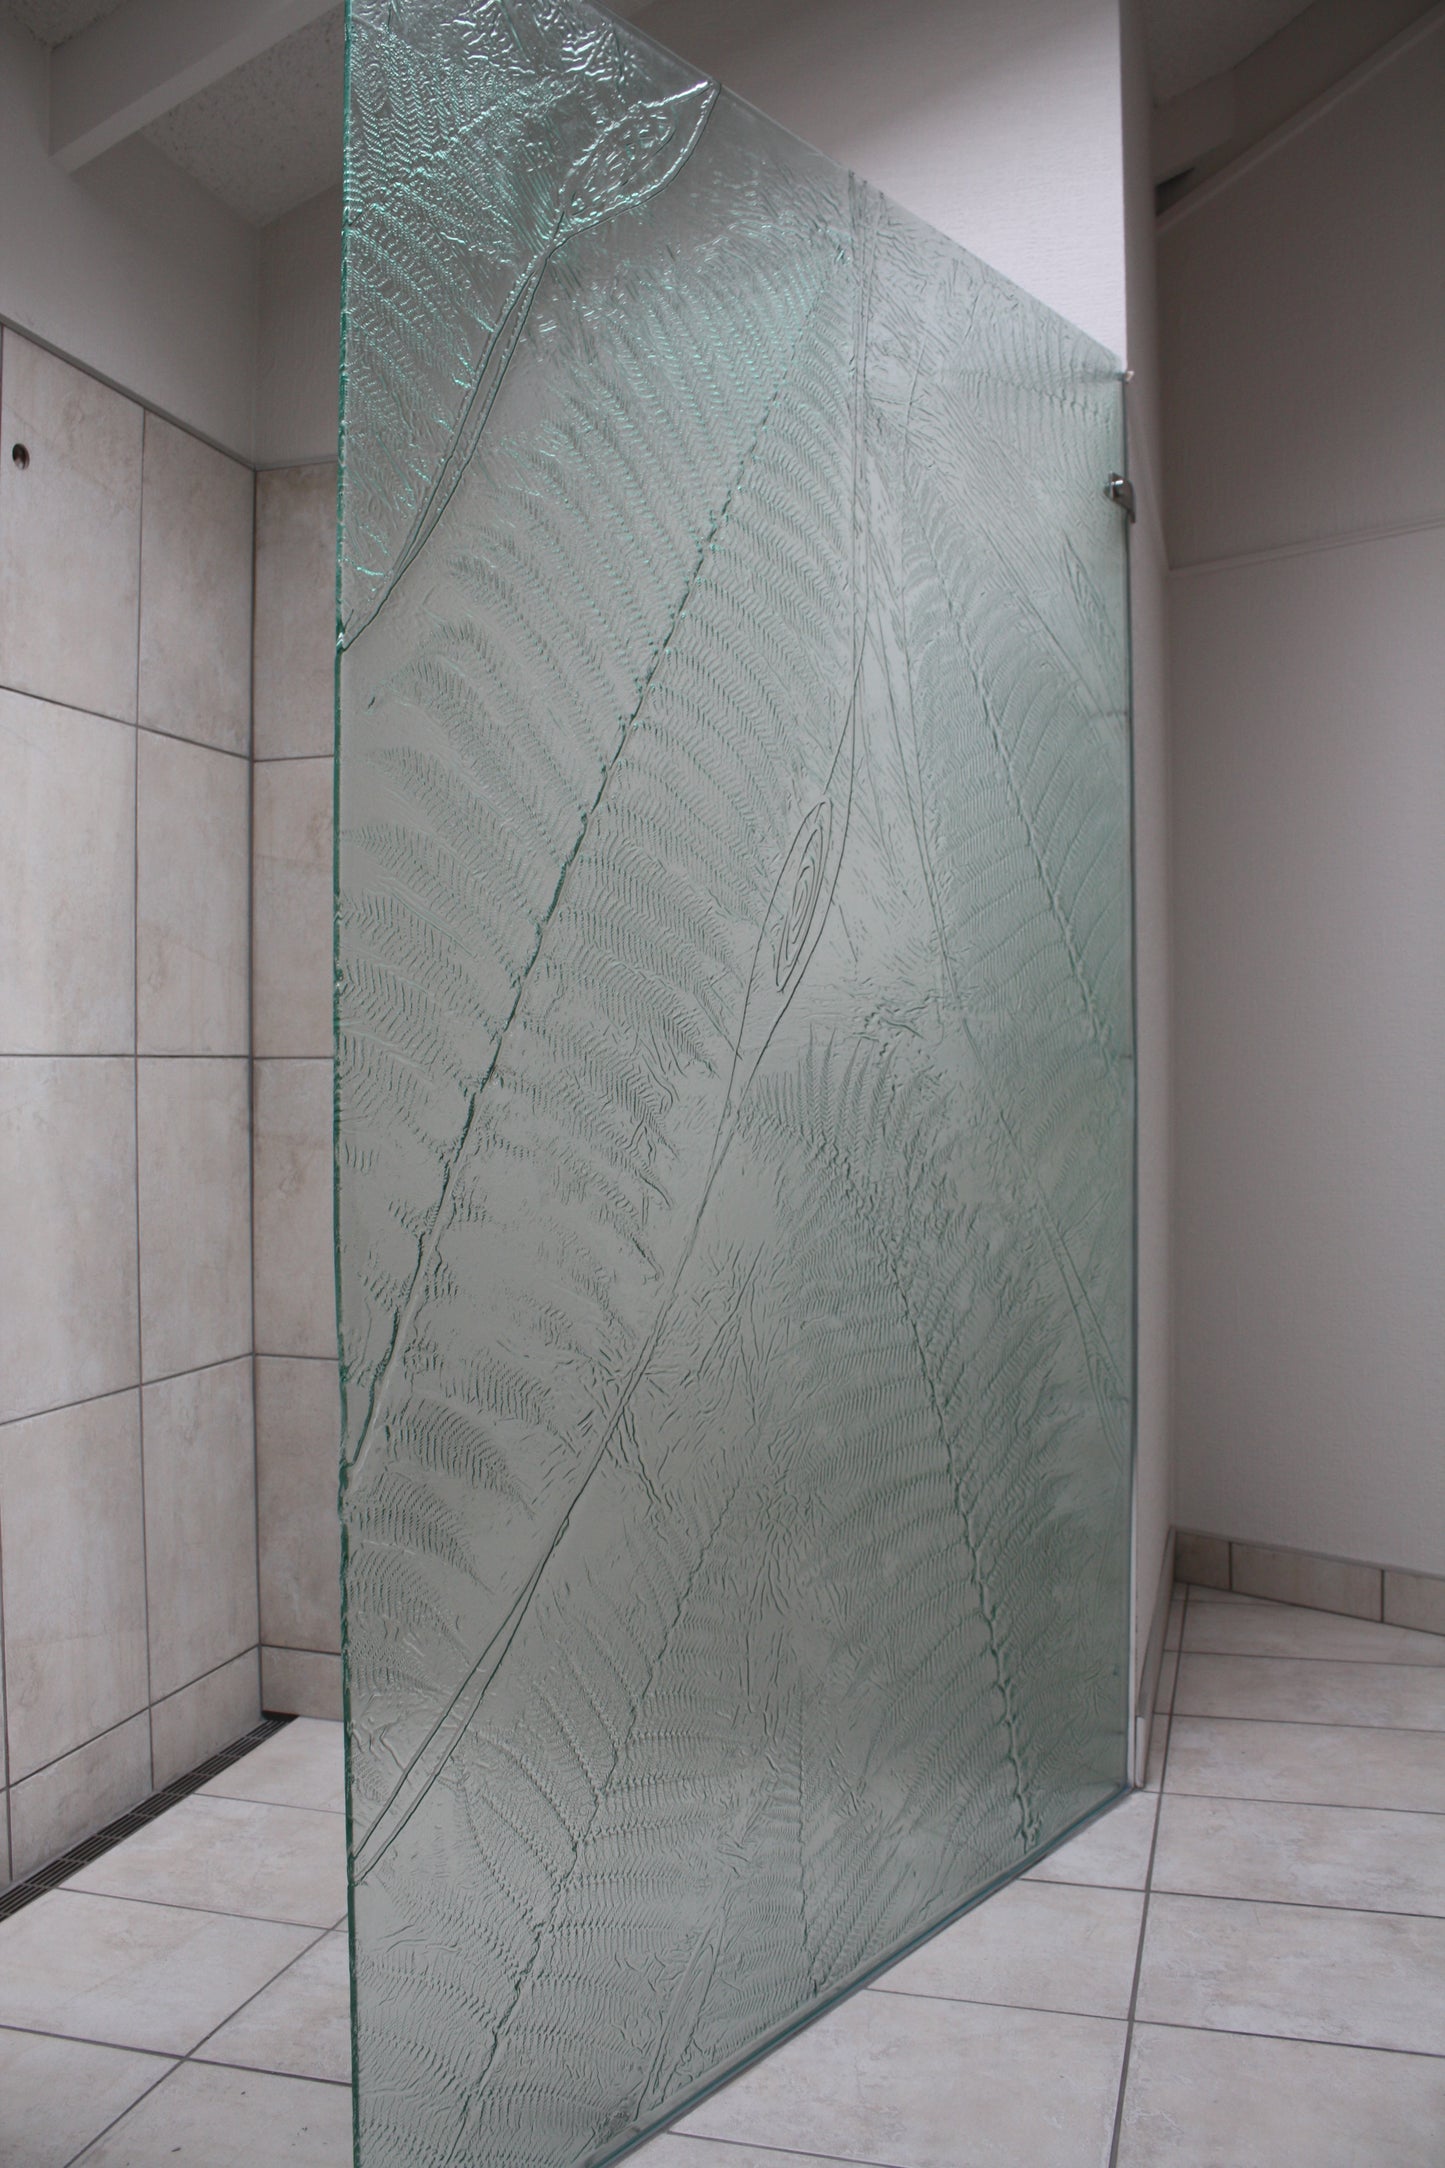 Large privacy panel with ferns slumped in bathroom shower